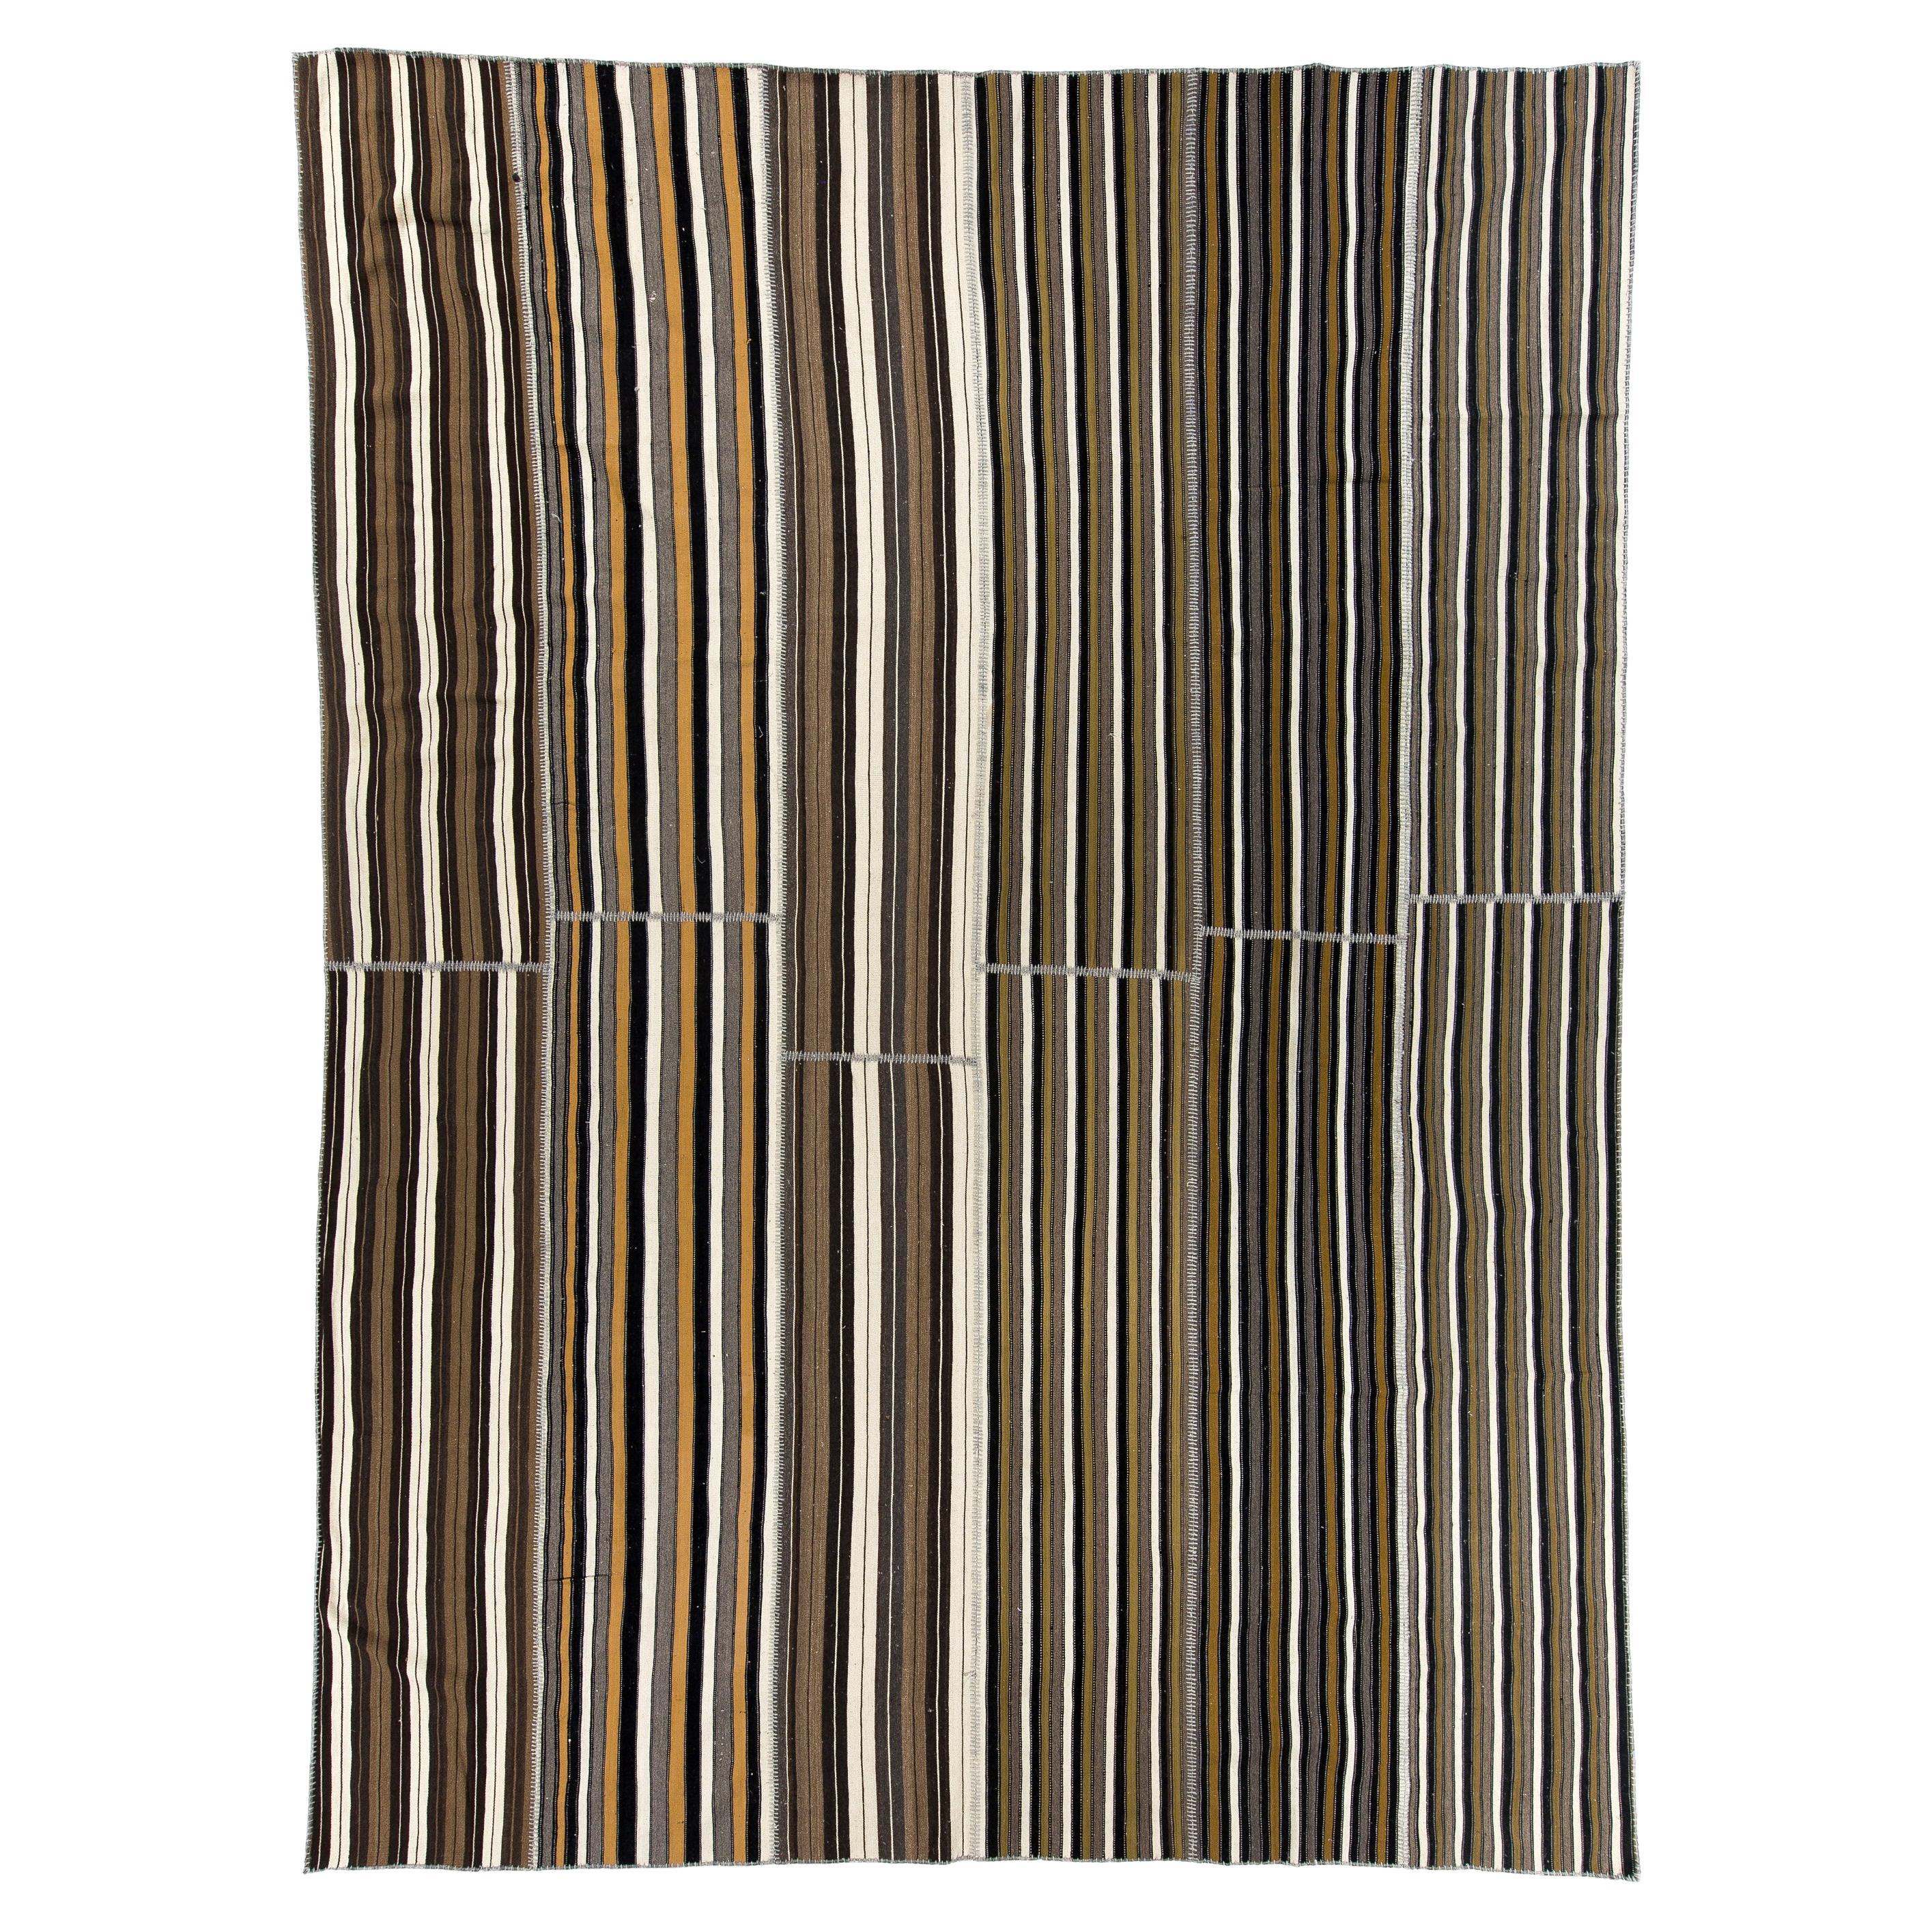 11x15 ft Striped Flat-woven Turkish Kilim in Earthy Colors, Large Minimalist Rug For Sale